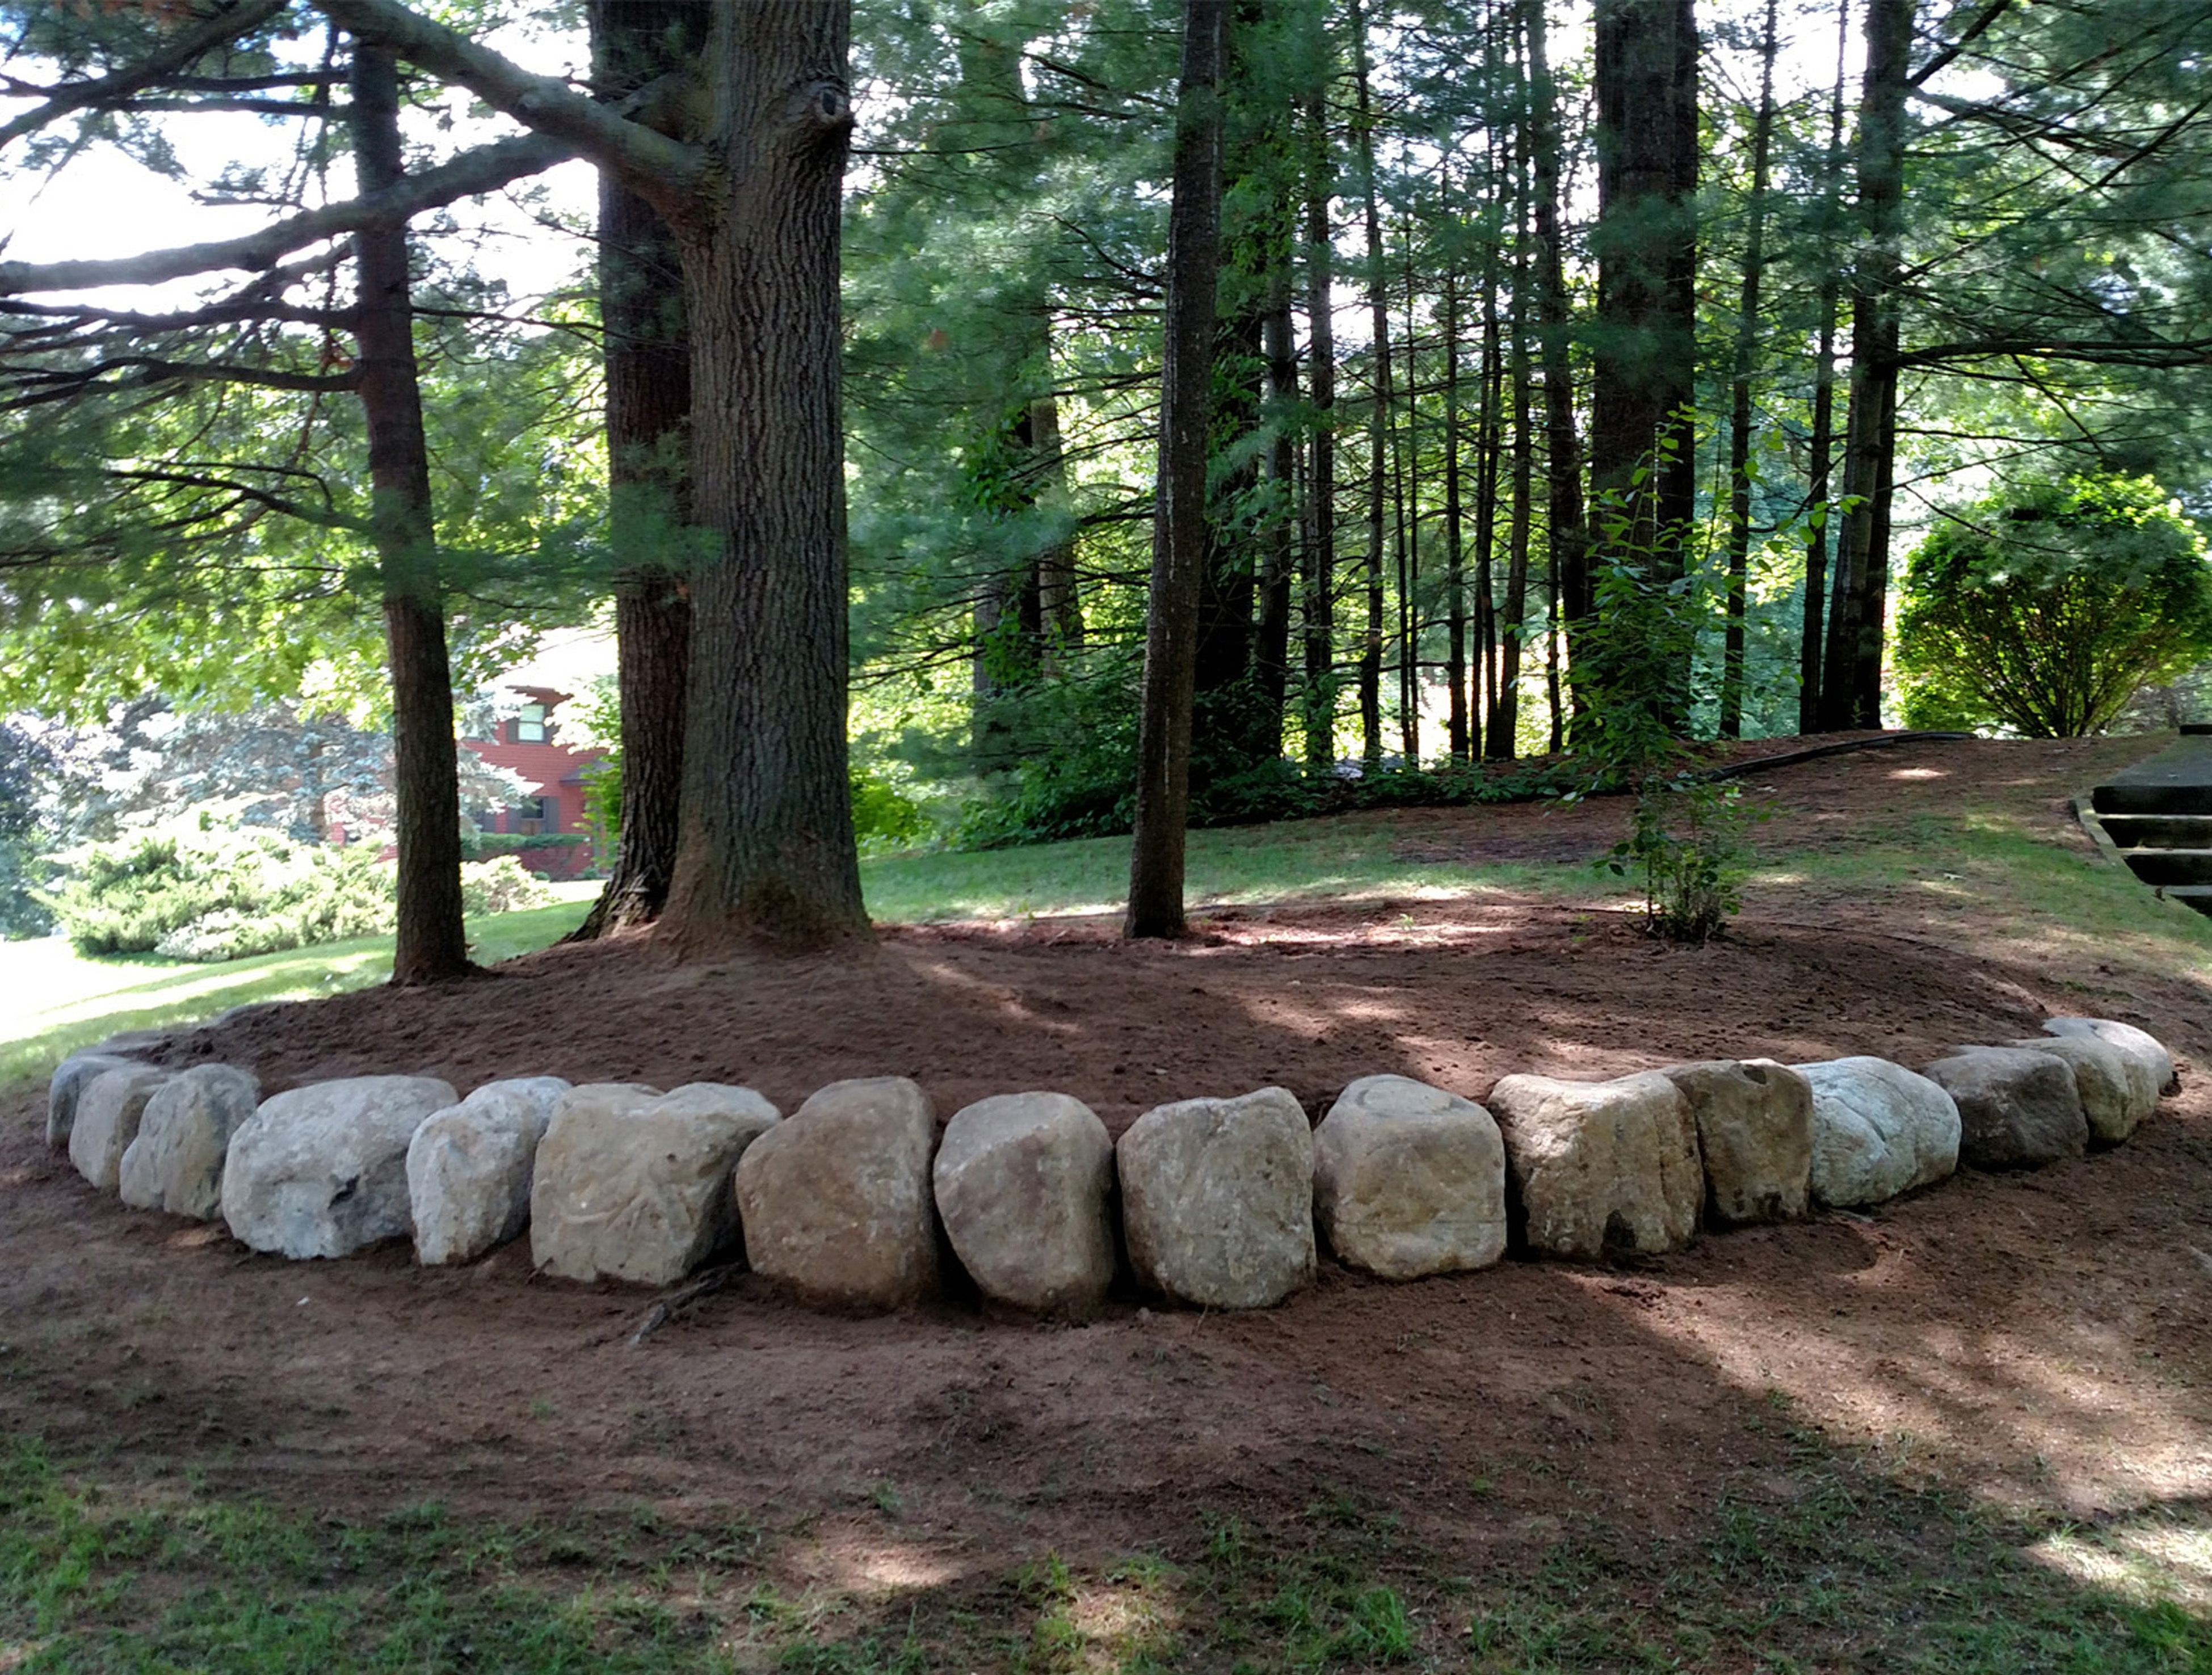 The right side of the newly leveled hill area with the remaining large stone placed for the retaining wall